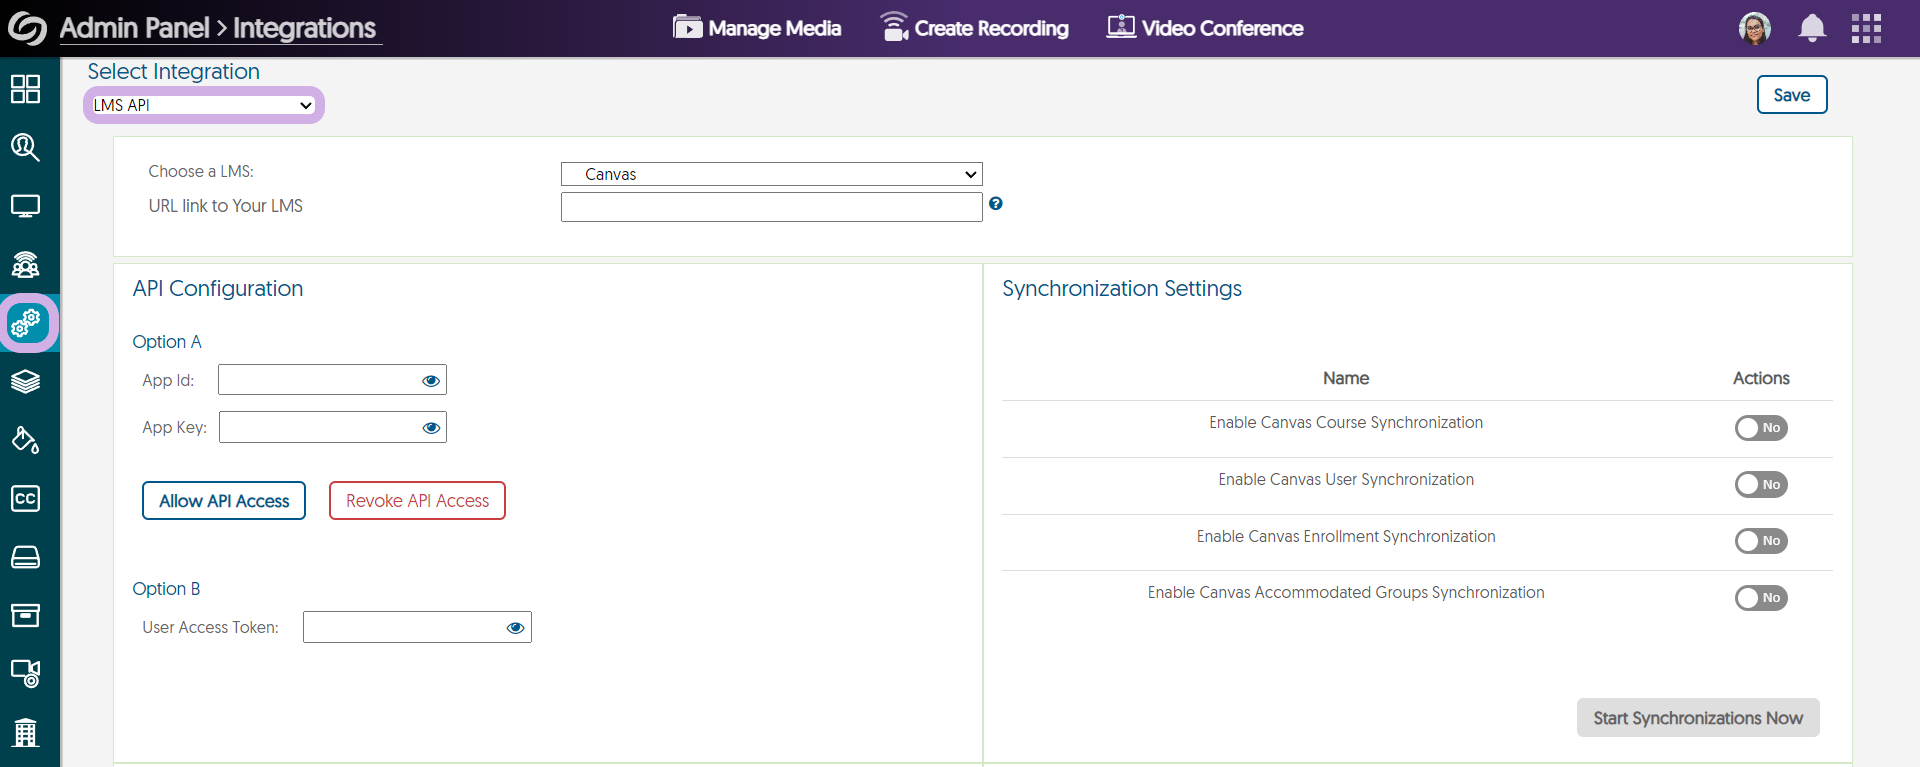 The integrations page in the Admin Panel.